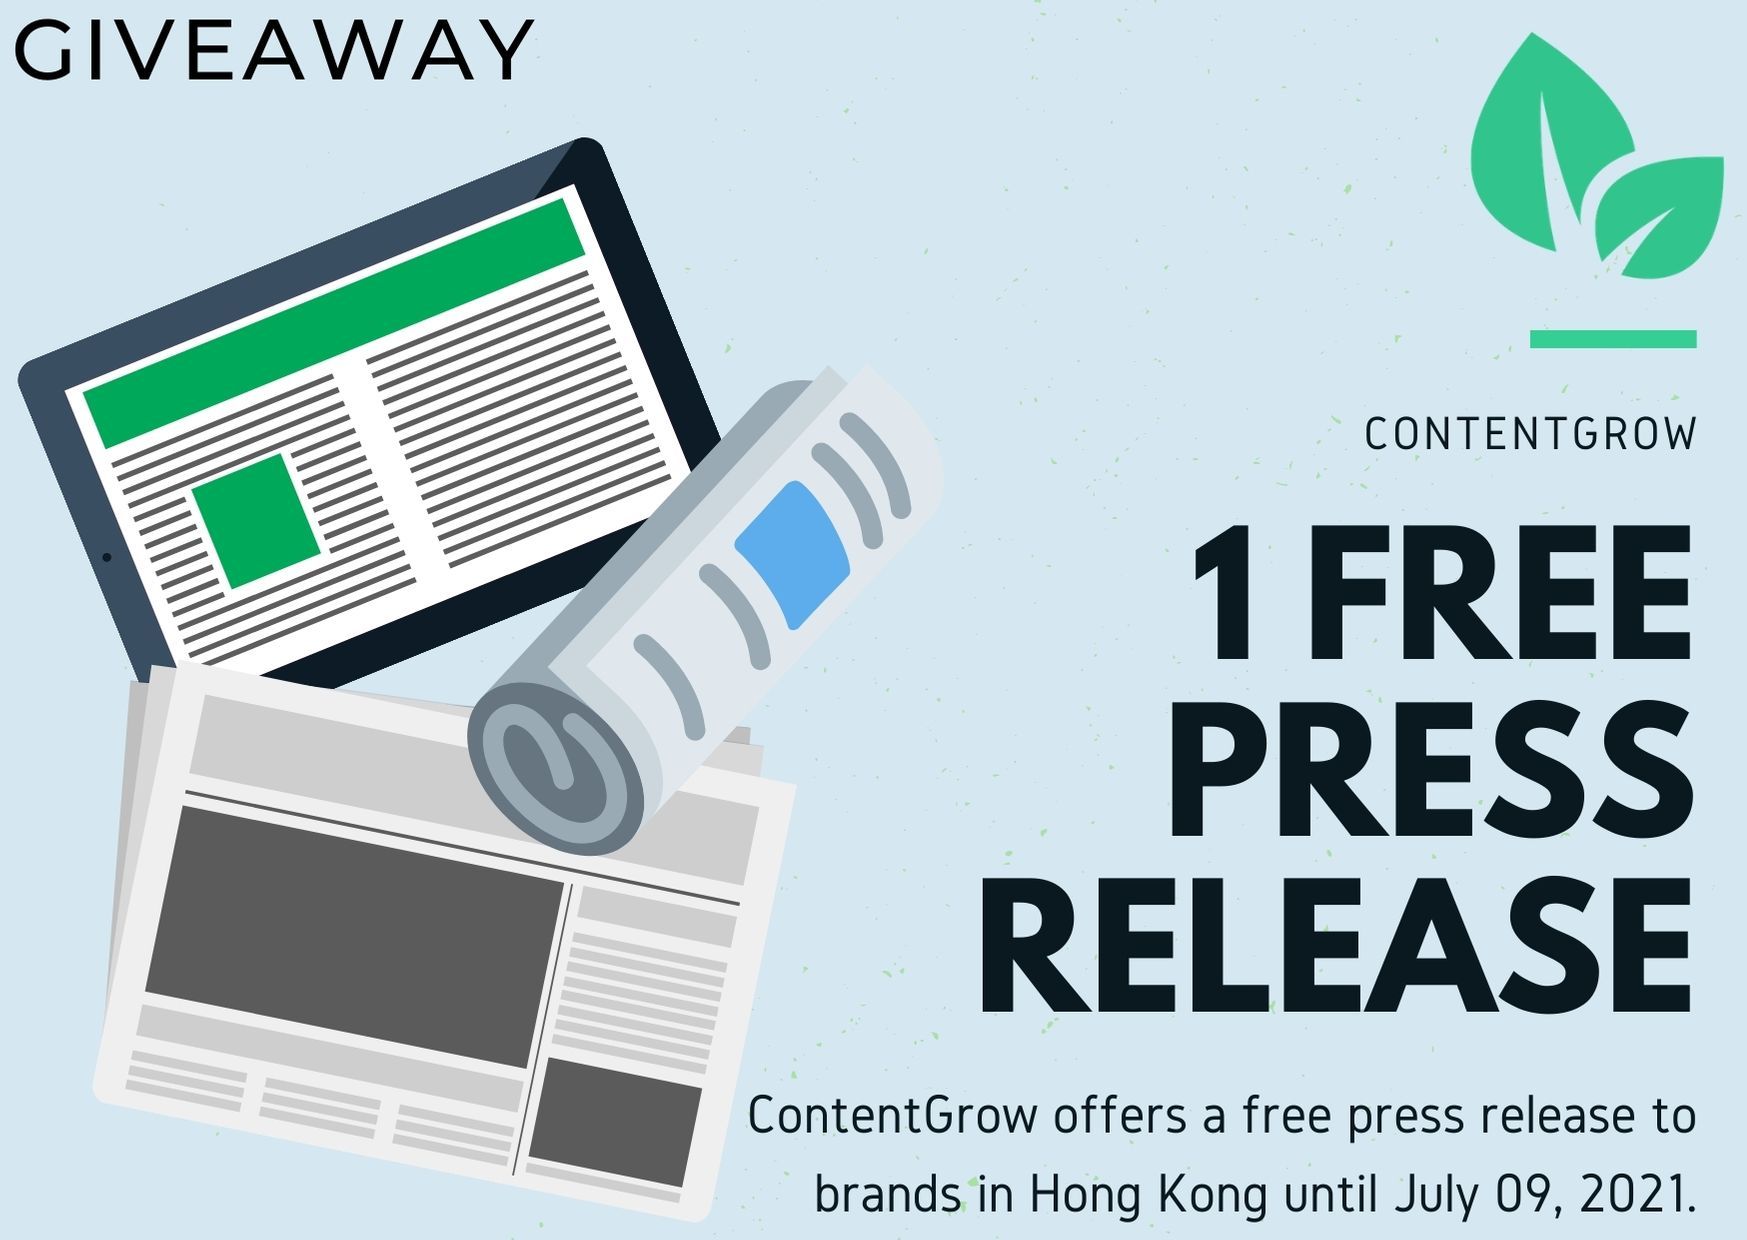 Giveaway: ContentGrow offers free press release to brands in Hong Kong